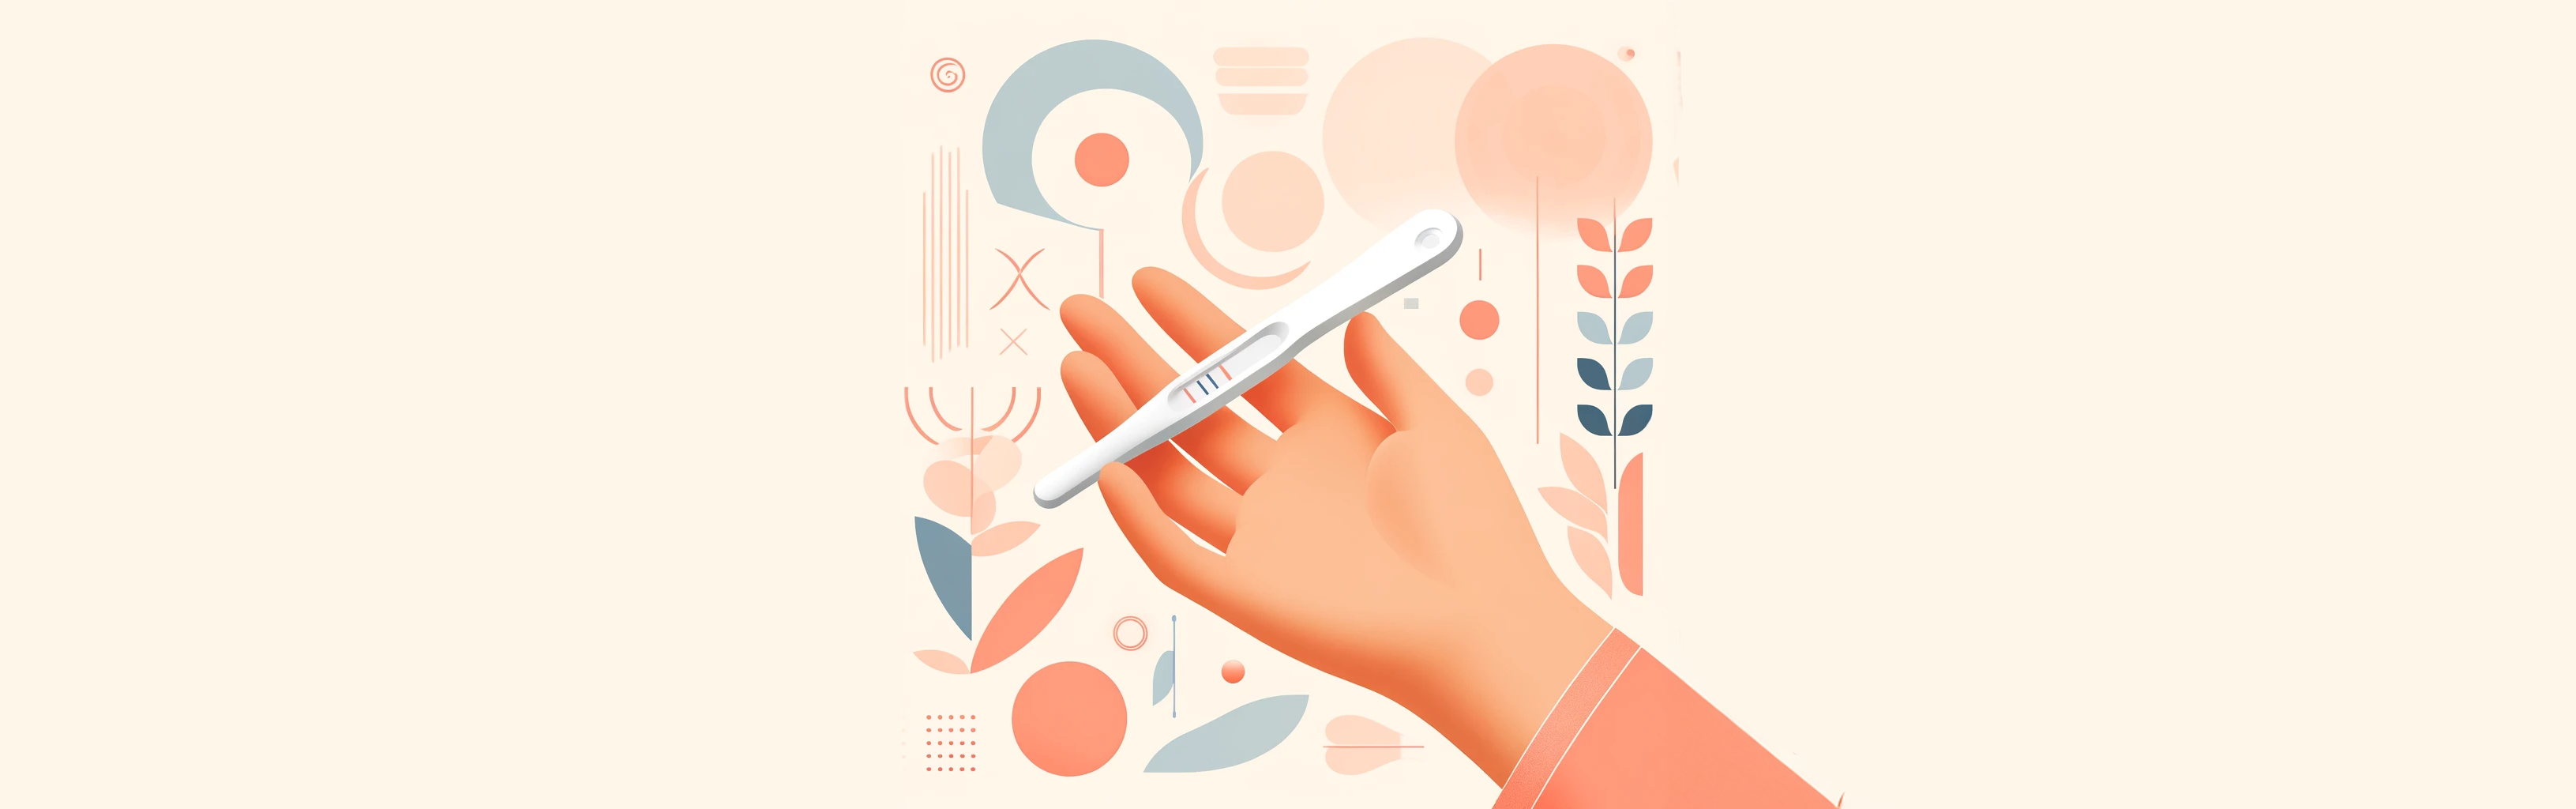 A modern, minimalist illustration depicting a hand holding a positive pregnancy test, surrounded by abstract shapes and elements in light orange and baby pink, symbolising joy and new beginnings.